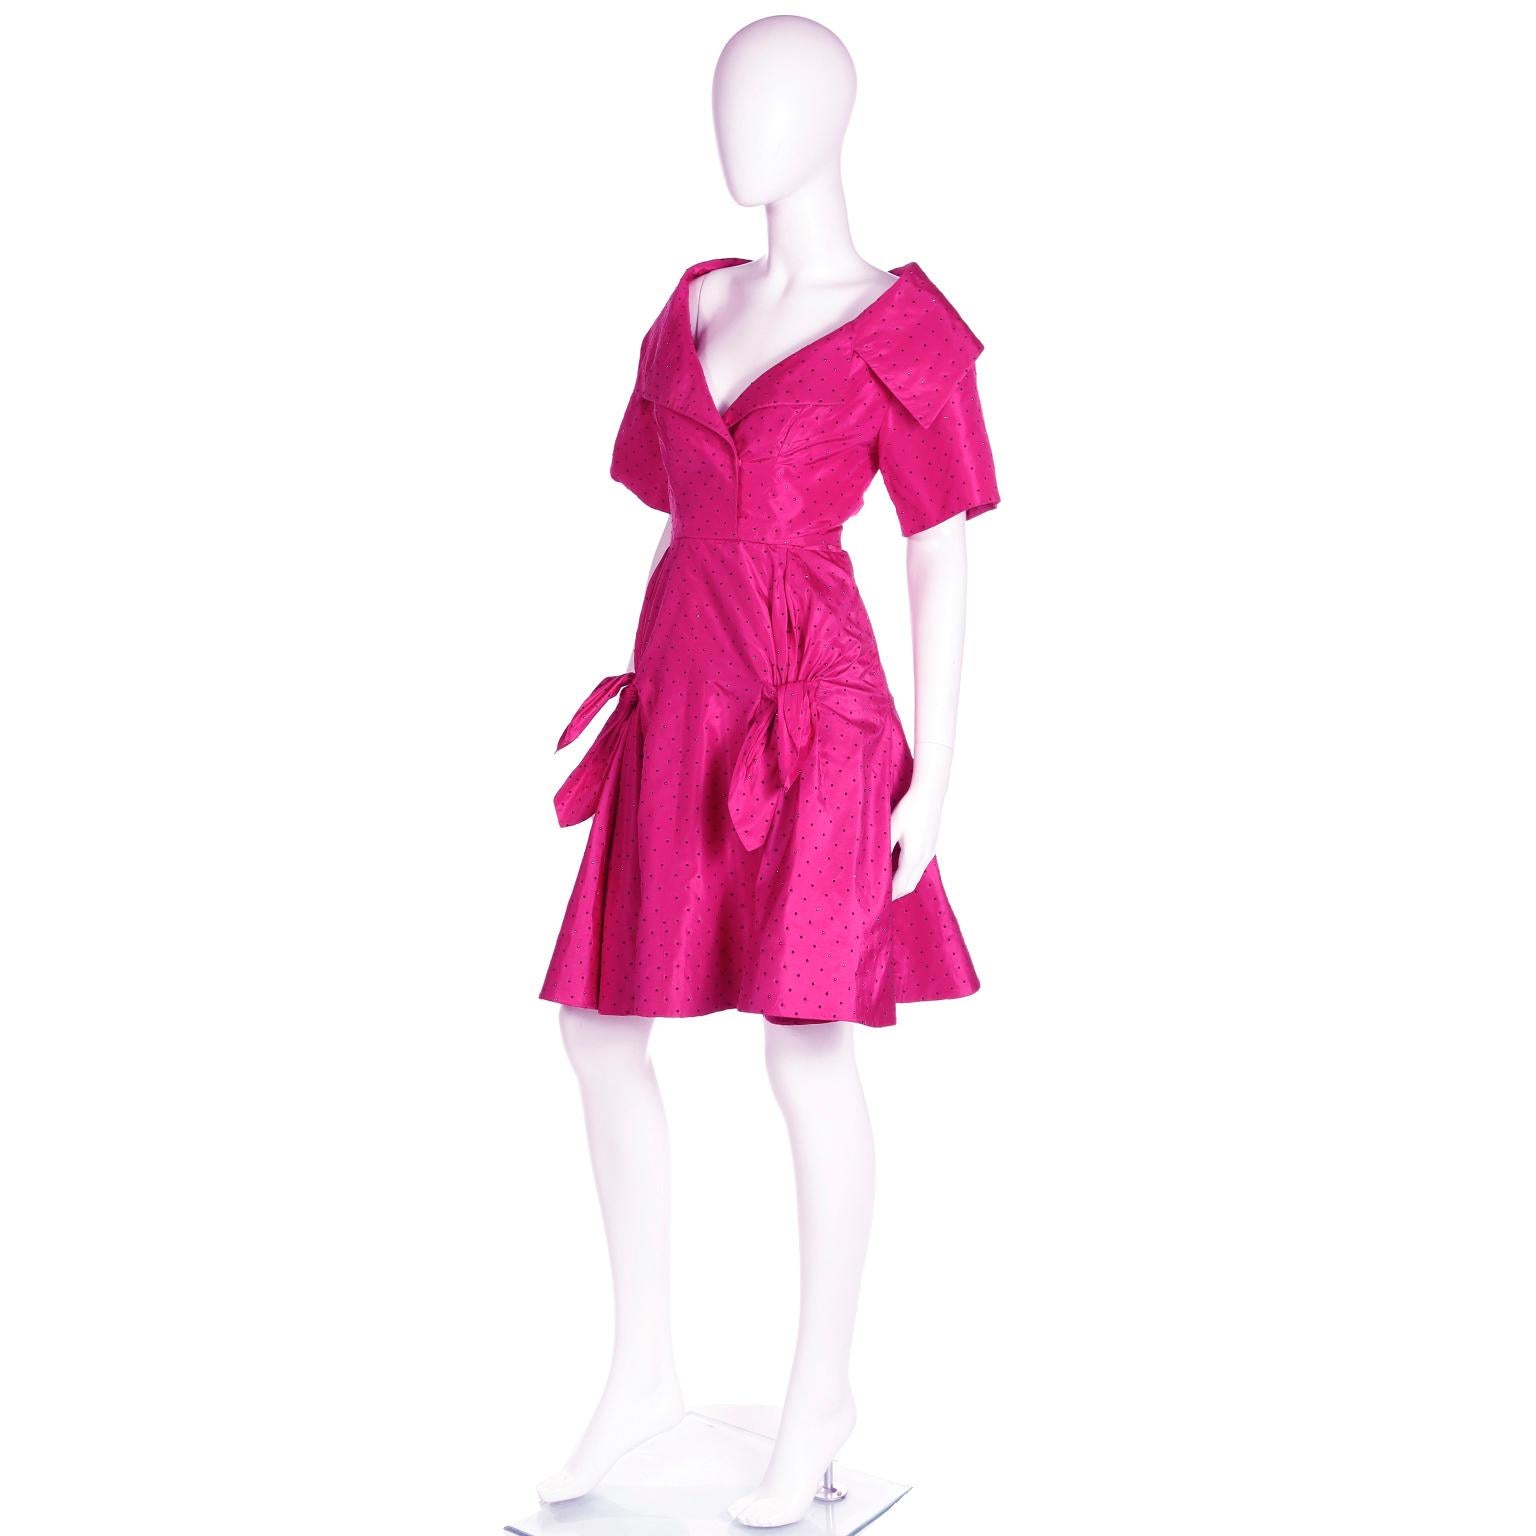 Christian Dior Couture 1987 Magenta Evening Dress w Crystals by Marc Bohan For Sale 10